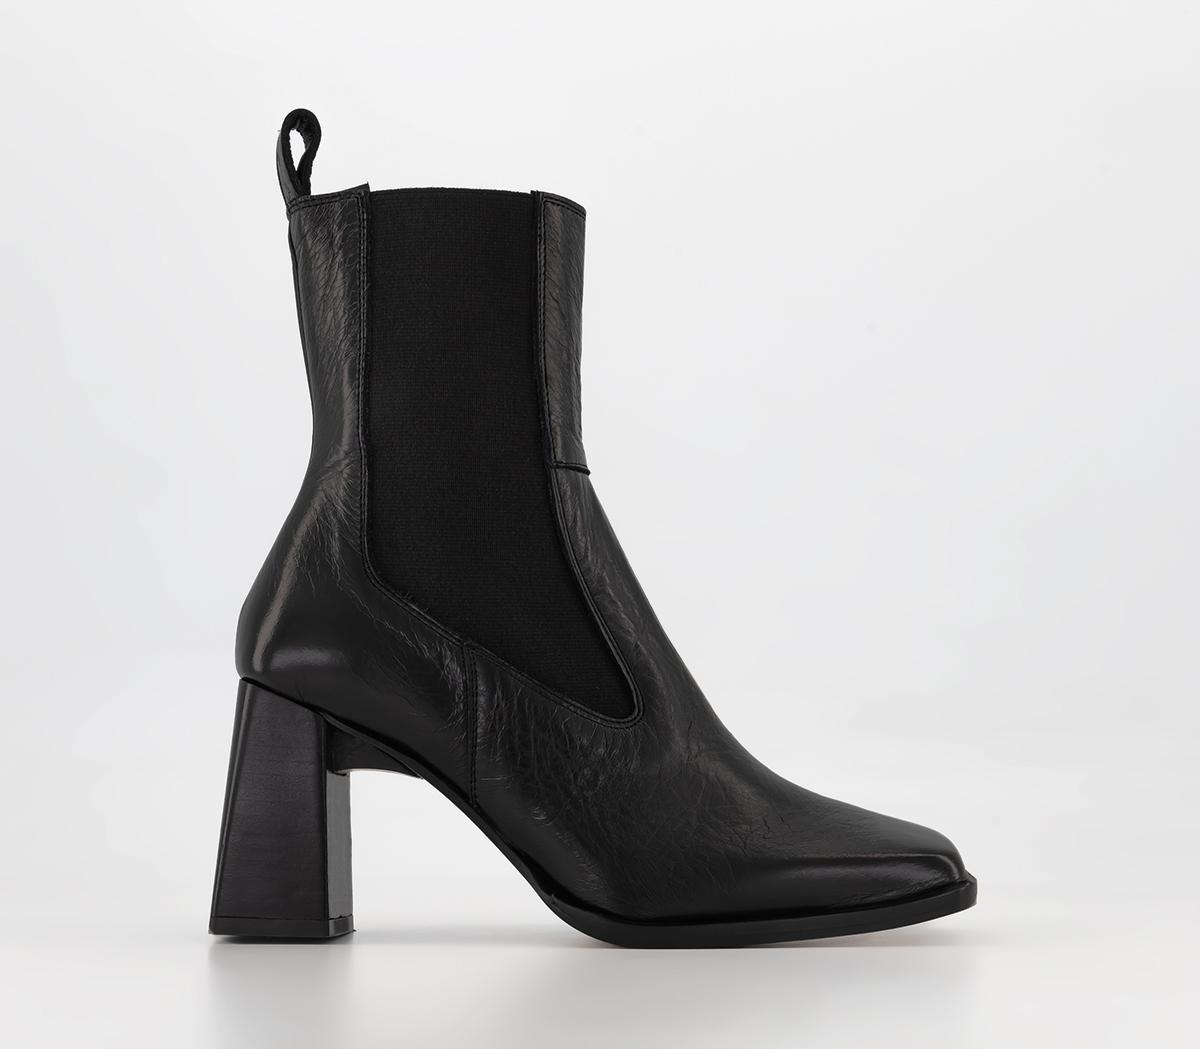 OFFICEAll Good Square Toe Chelsea BootsBlack Leather